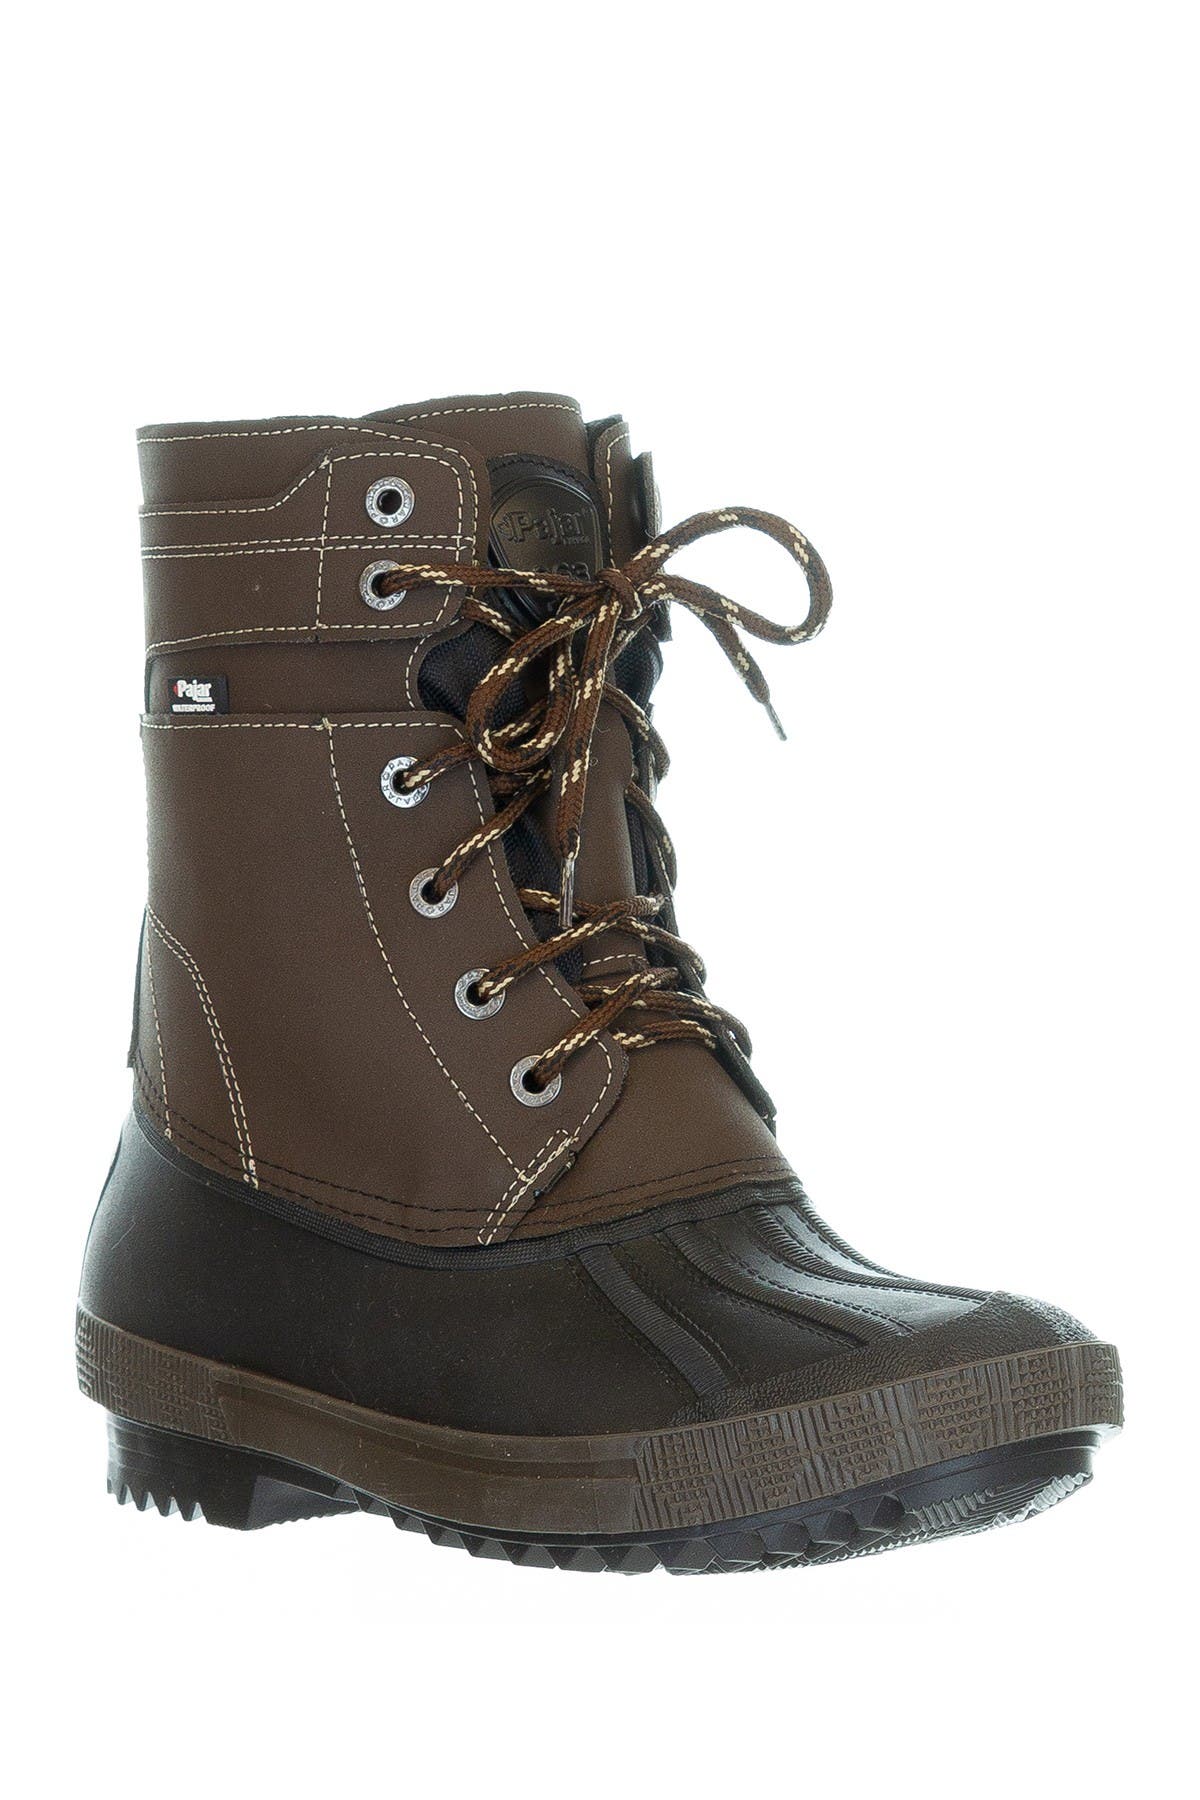 insulated and waterproof boots